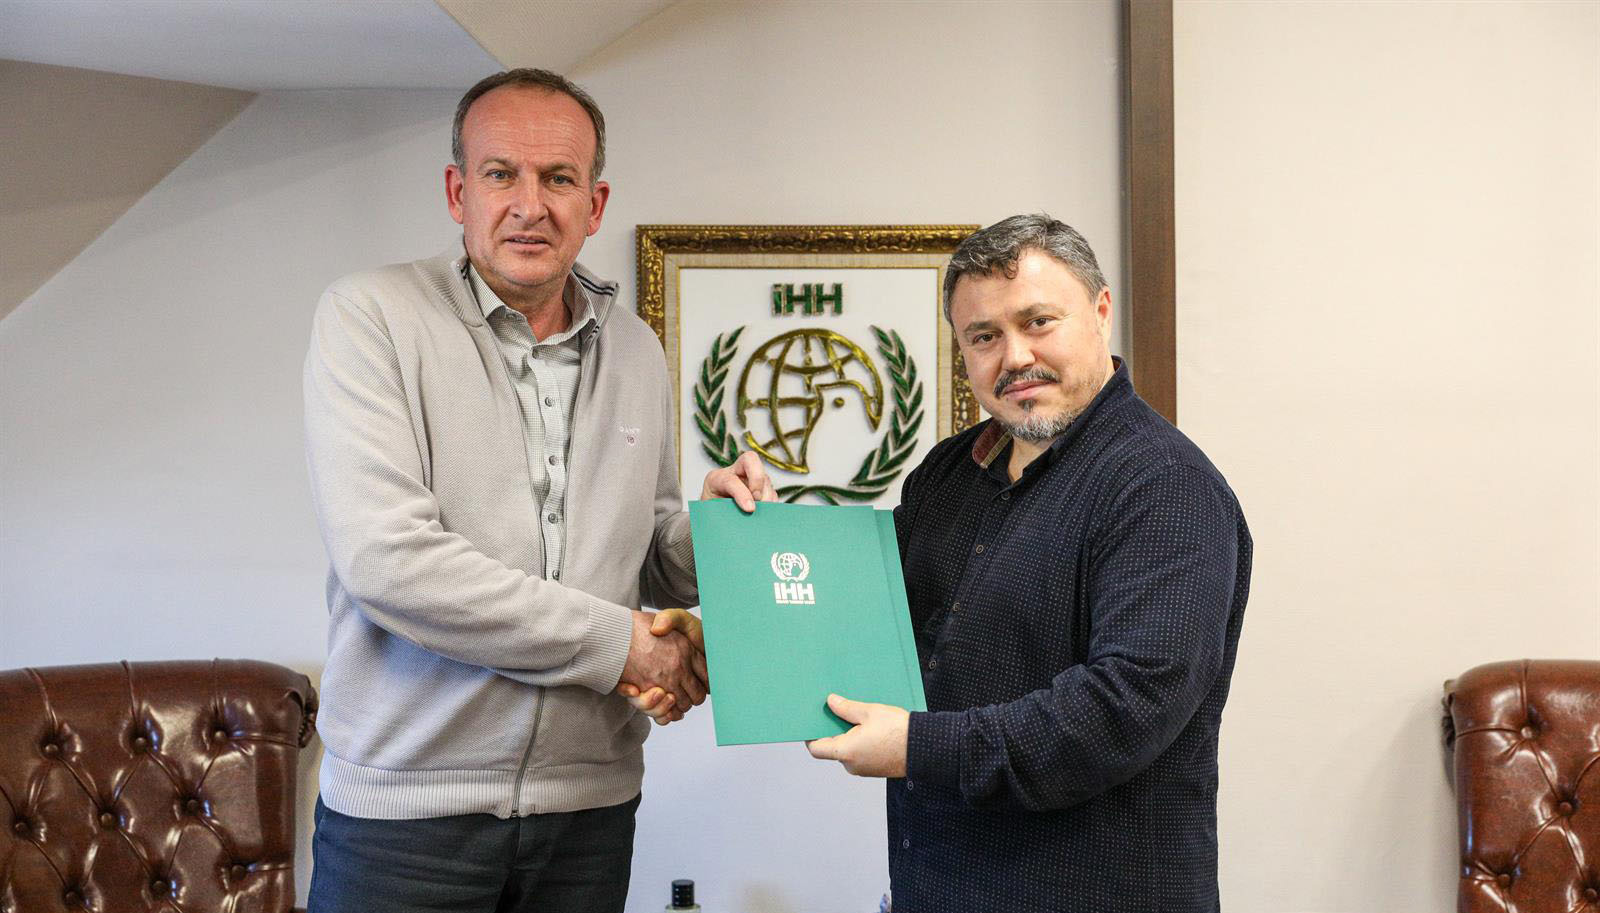 A cooperation protocol between IHH and MFS-Emmaus